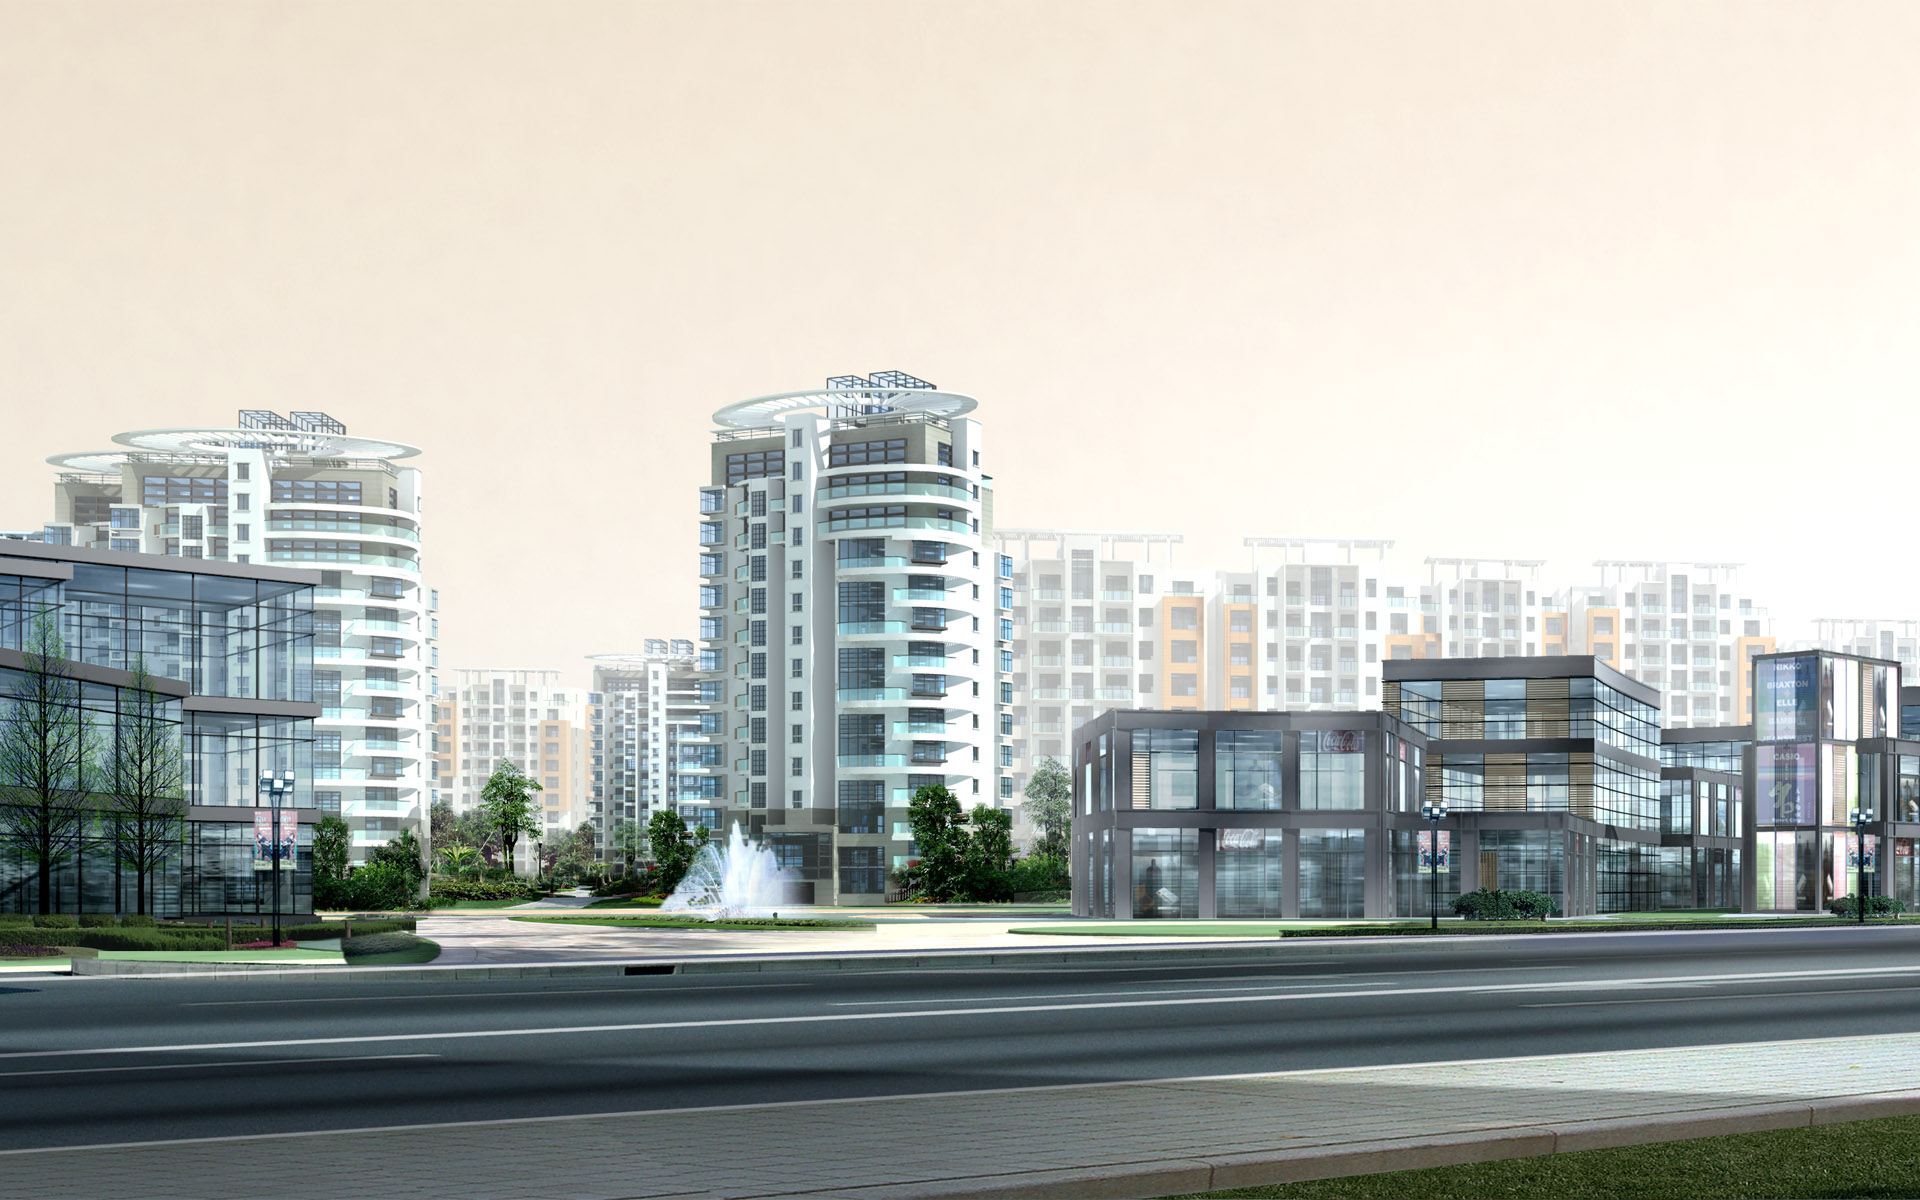 D Architectural Rendering of Residential Buildings ãArchitectural